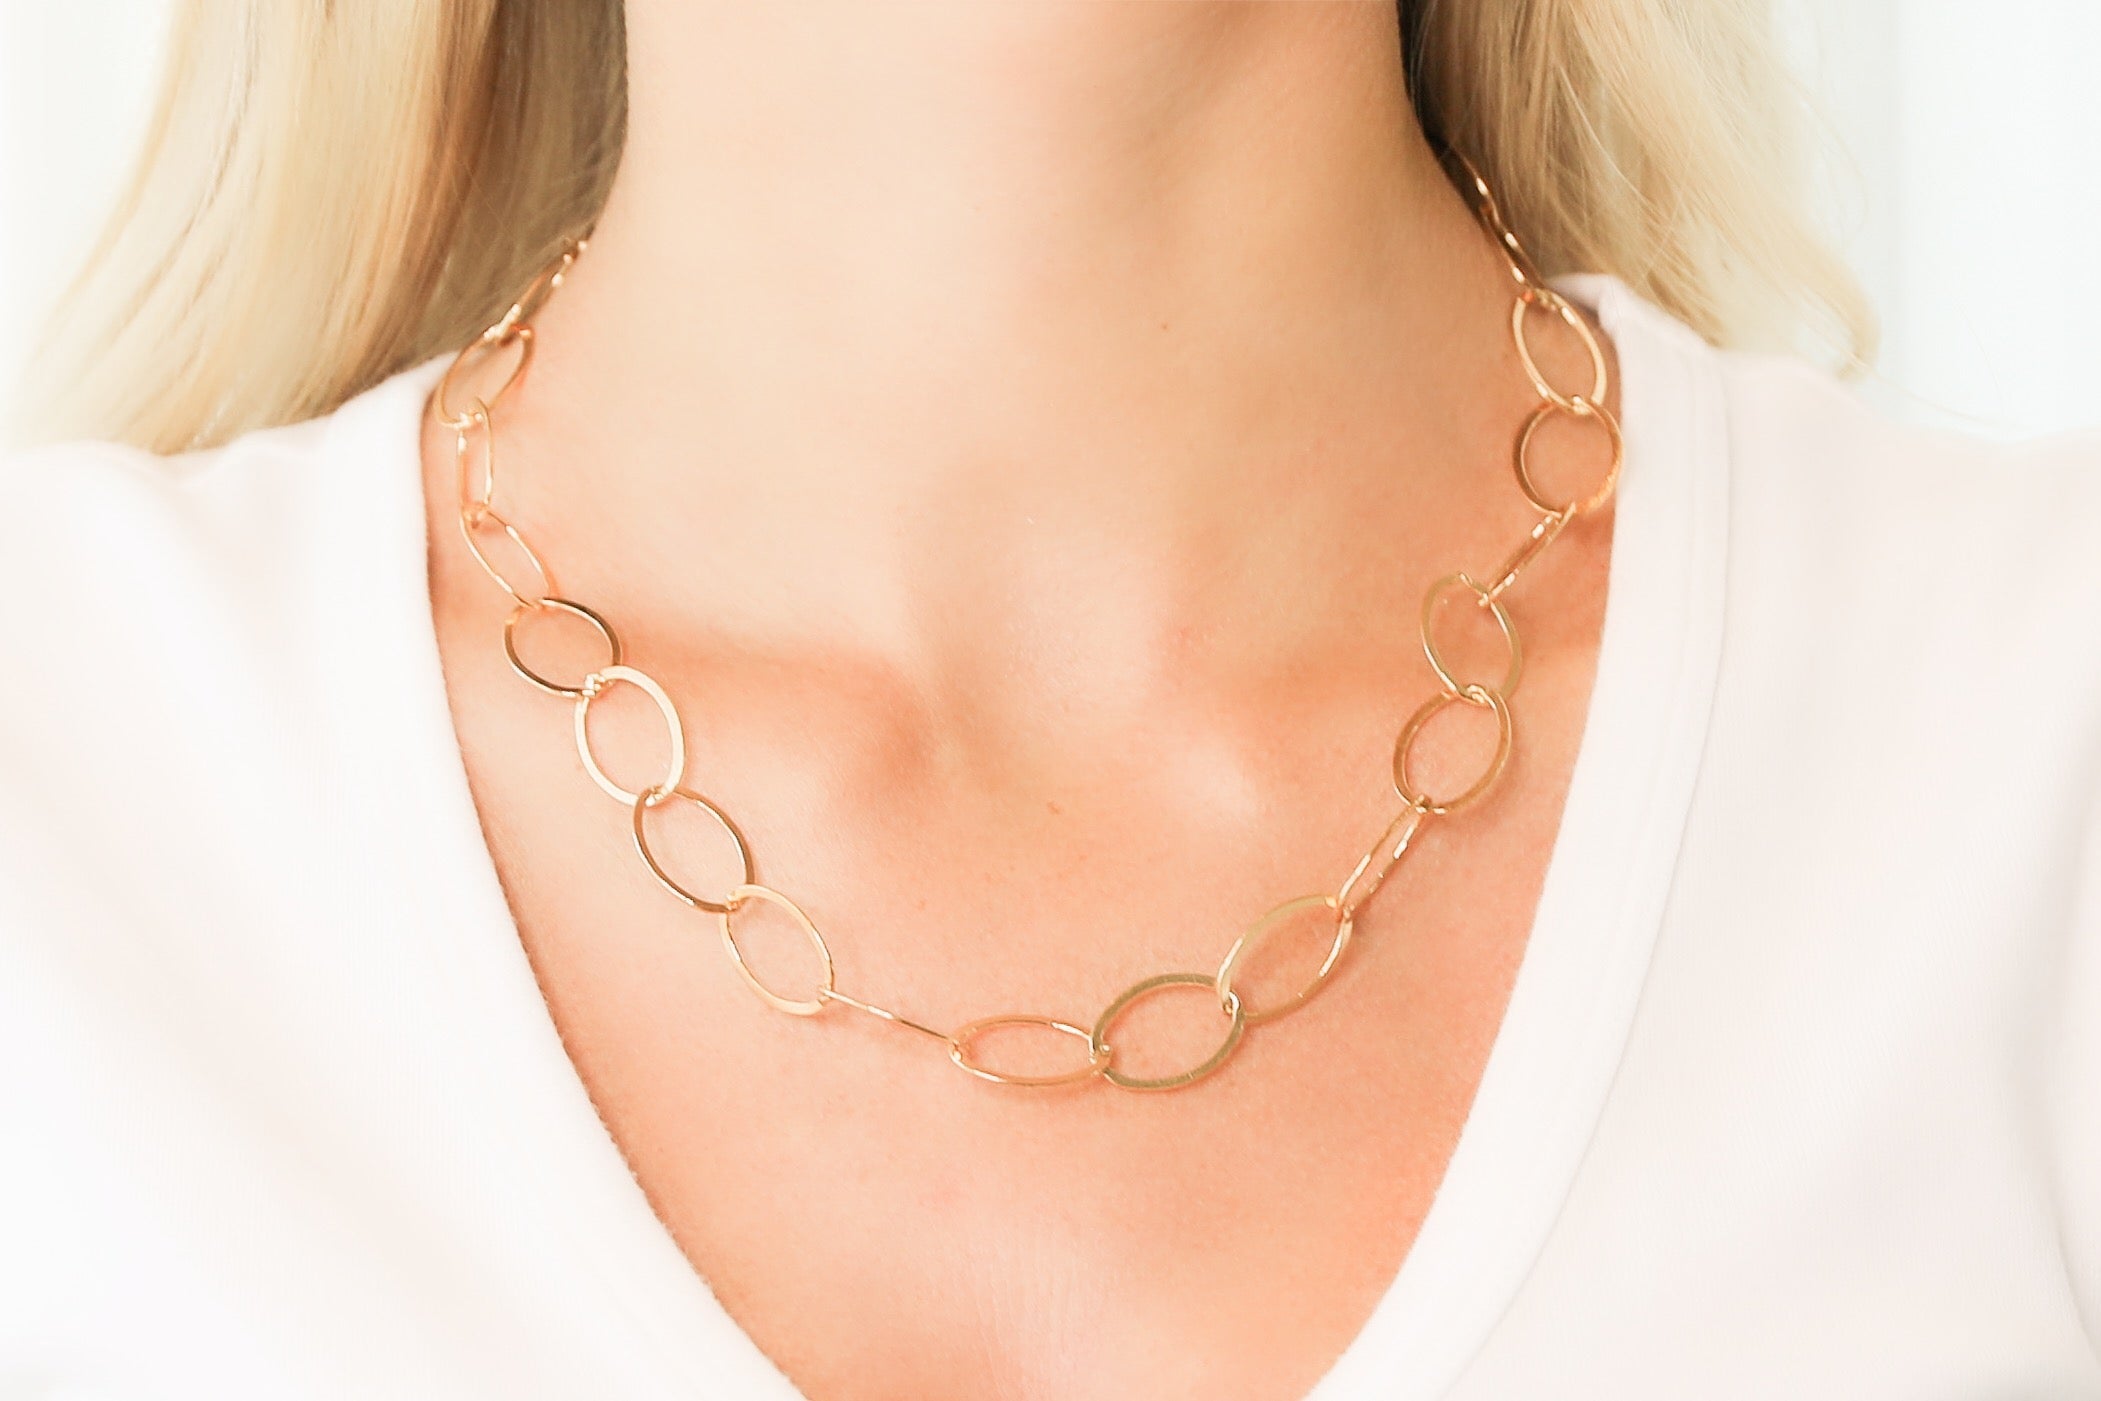 Thick Oval Link 14K Solid Gold Italian Chain Link Necklace, Large Links  modern Minimalist Layering Chain Necklace Great for Everyday Wear - Etsy